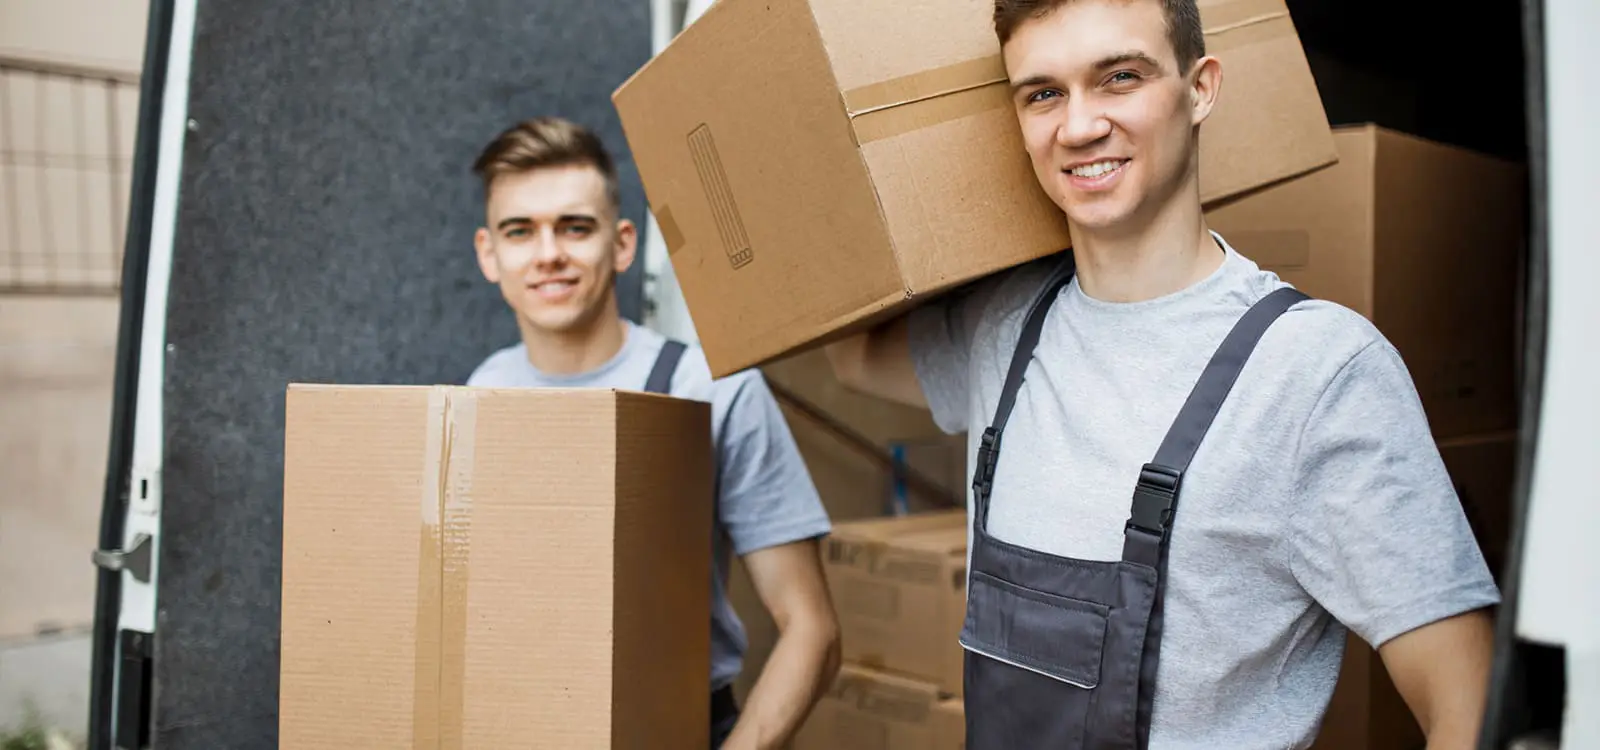 Best Packers and Movers in Delhi NCR - Omwati Packers and Movers